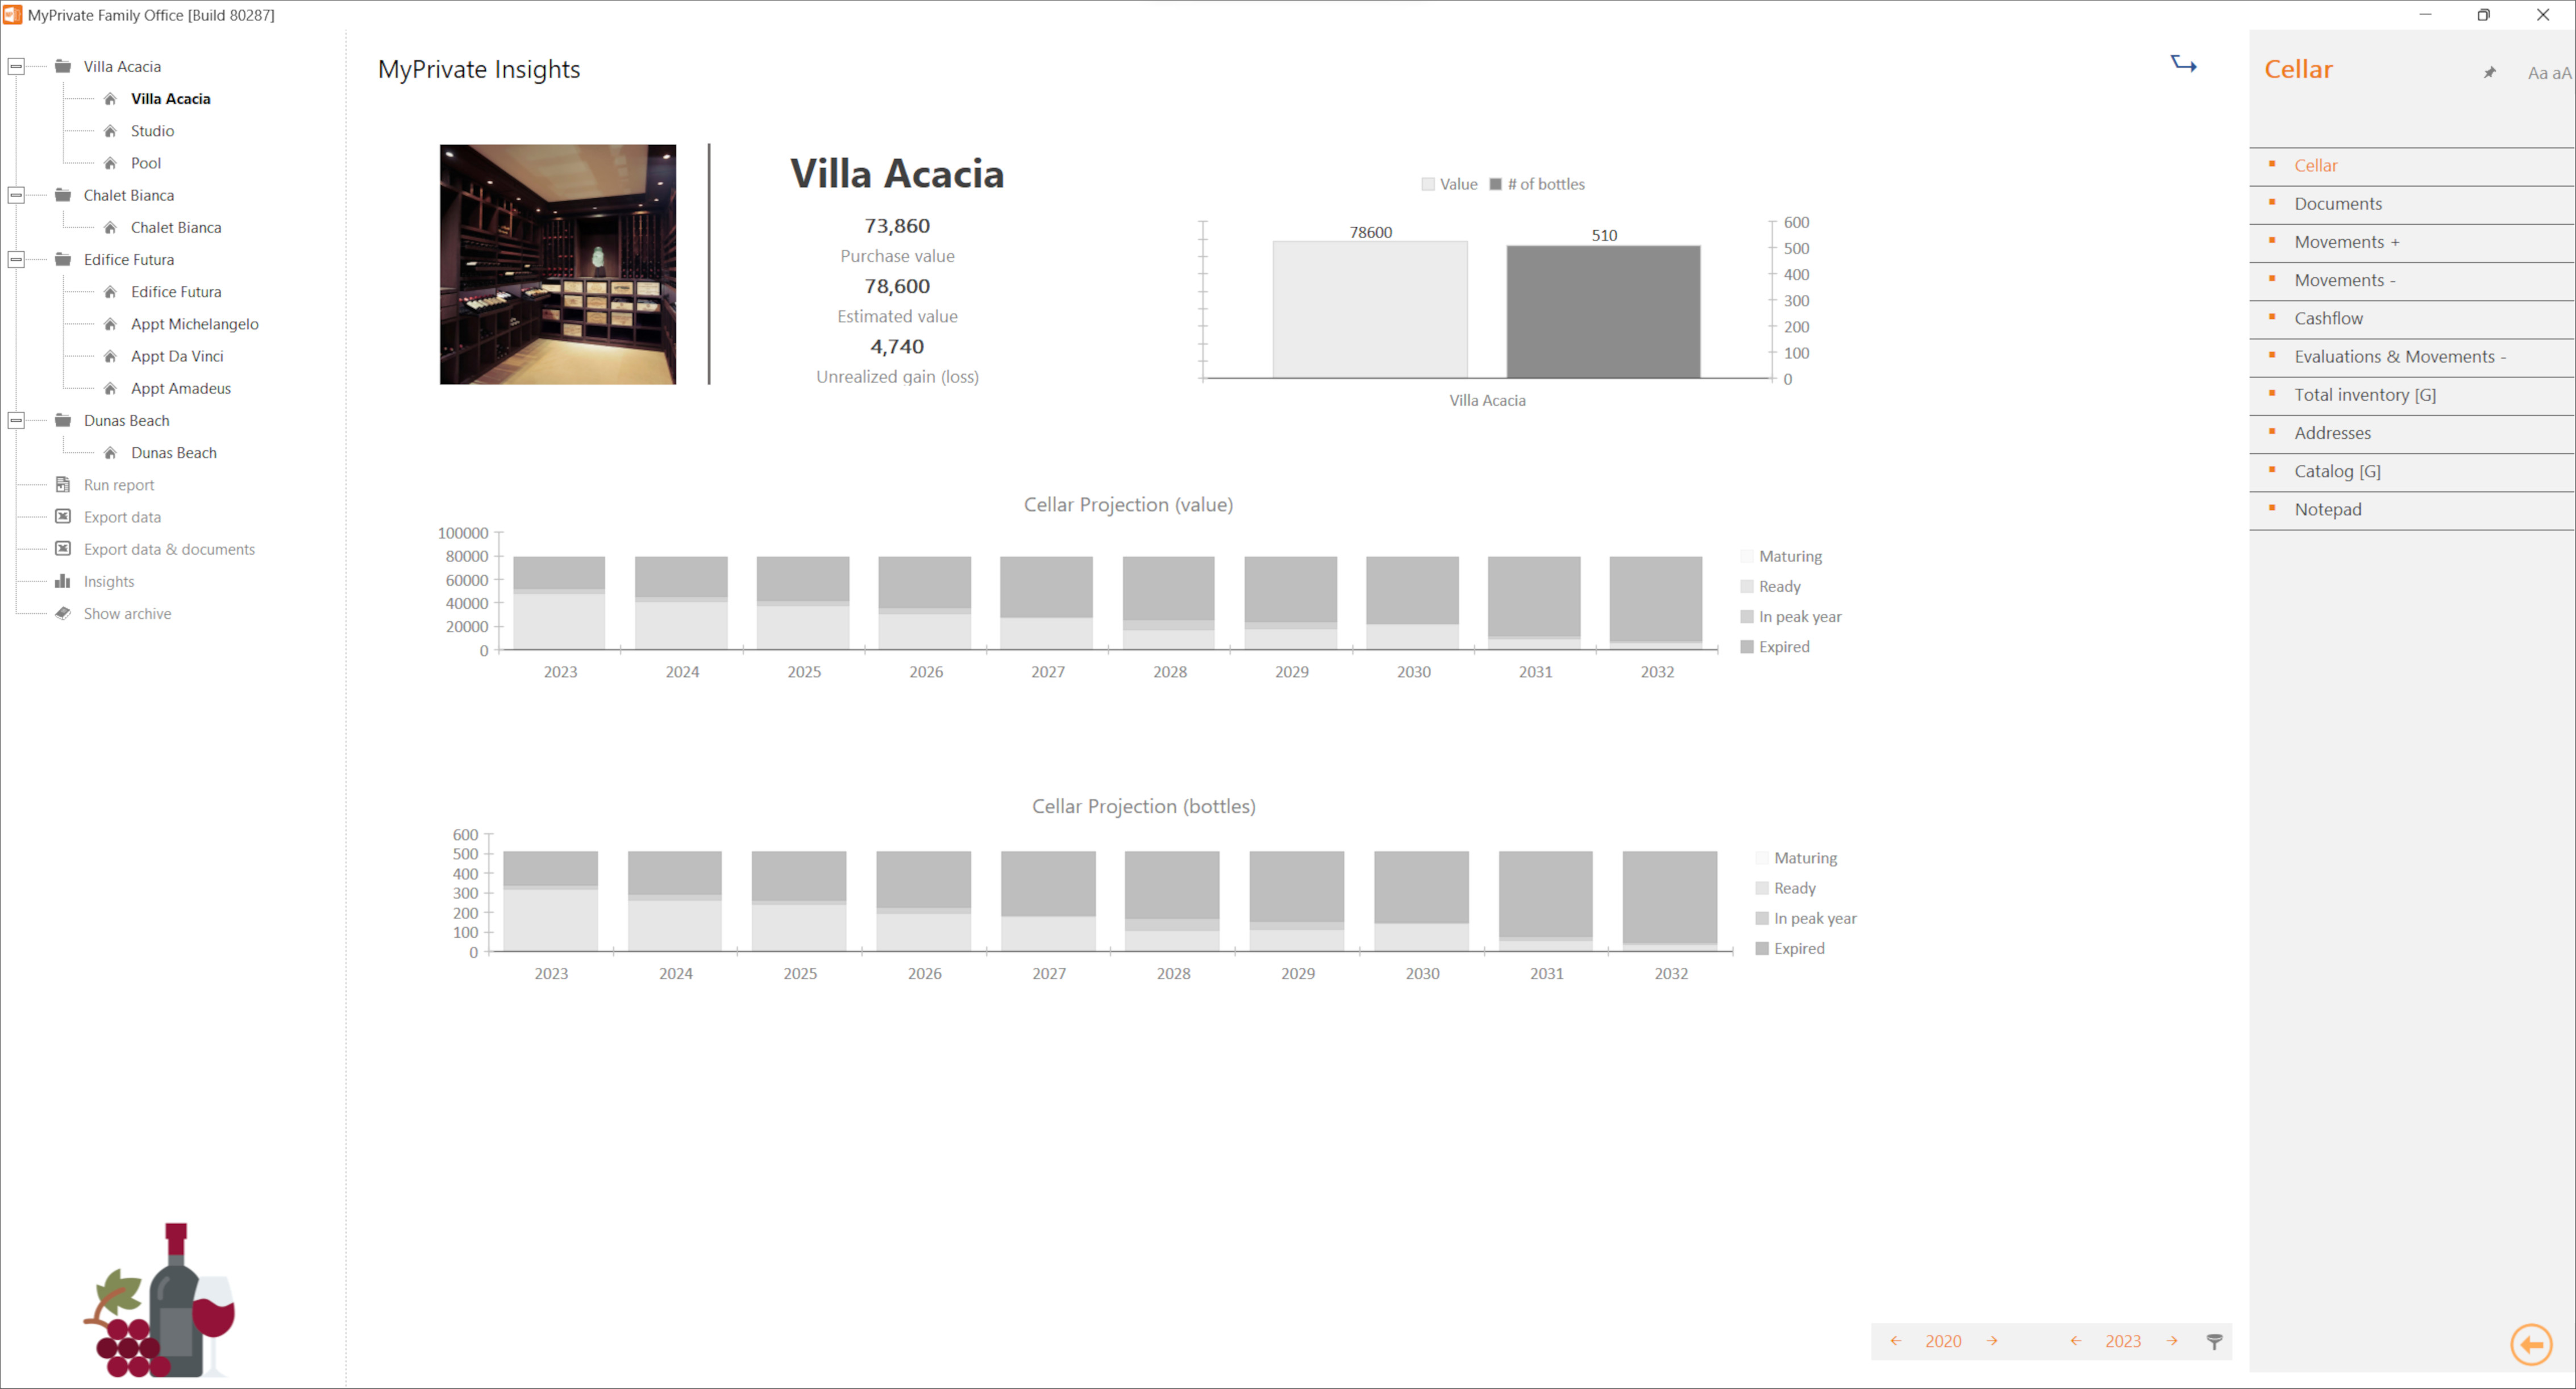 Analytical vue on the projected future evolution of your wine cellar showing value and number of bottles